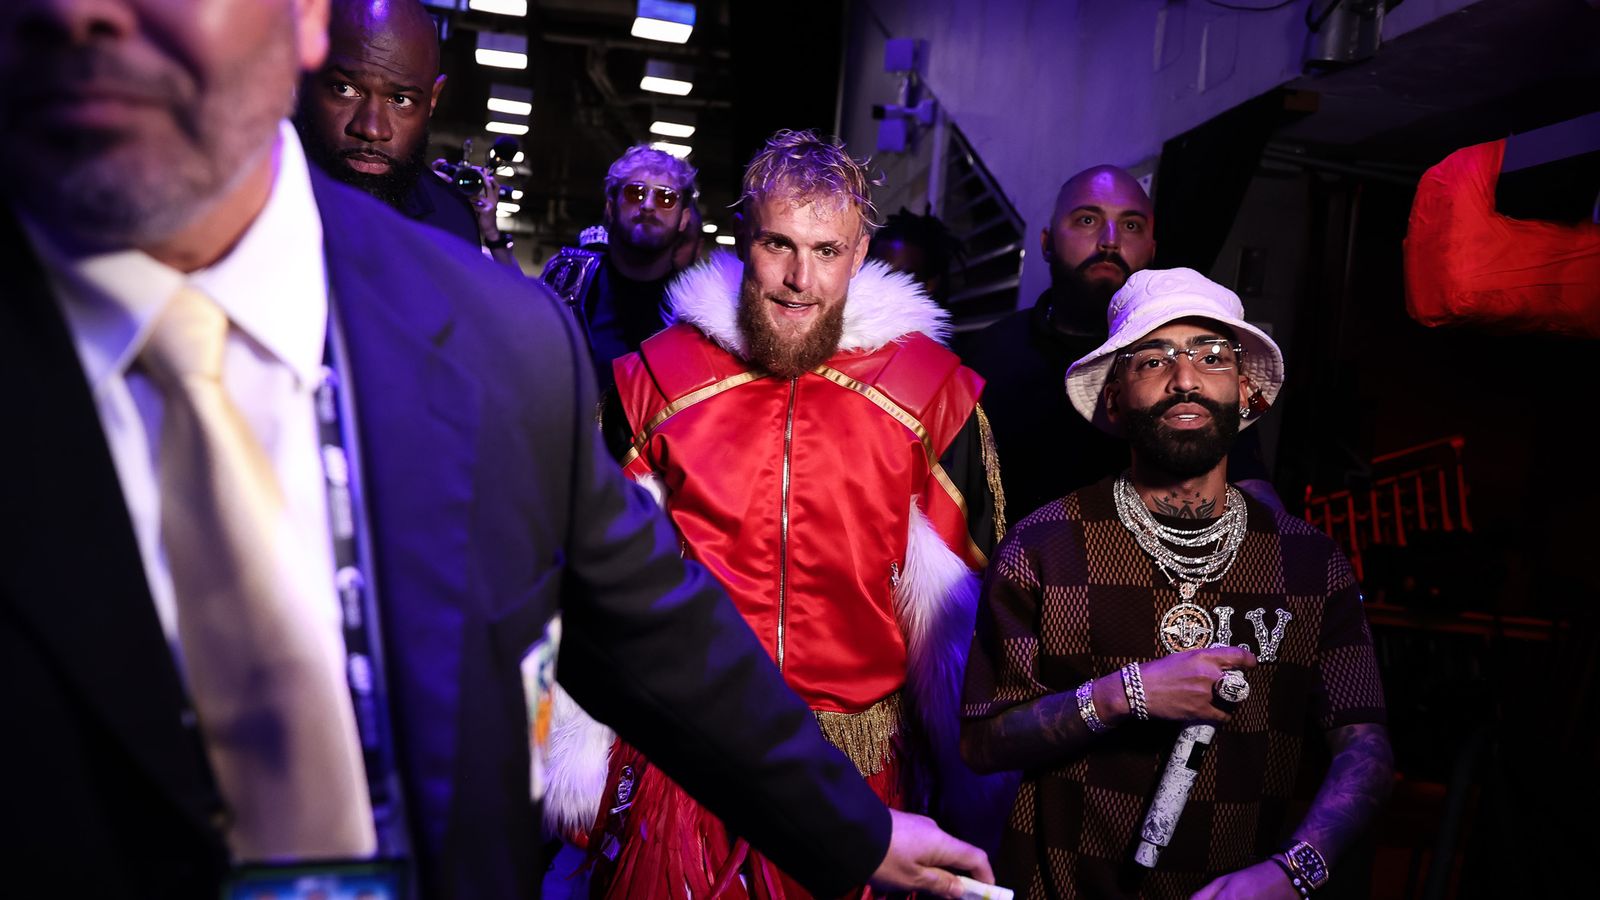 When all is said and done, will Jake Paul be a net positive for boxing?